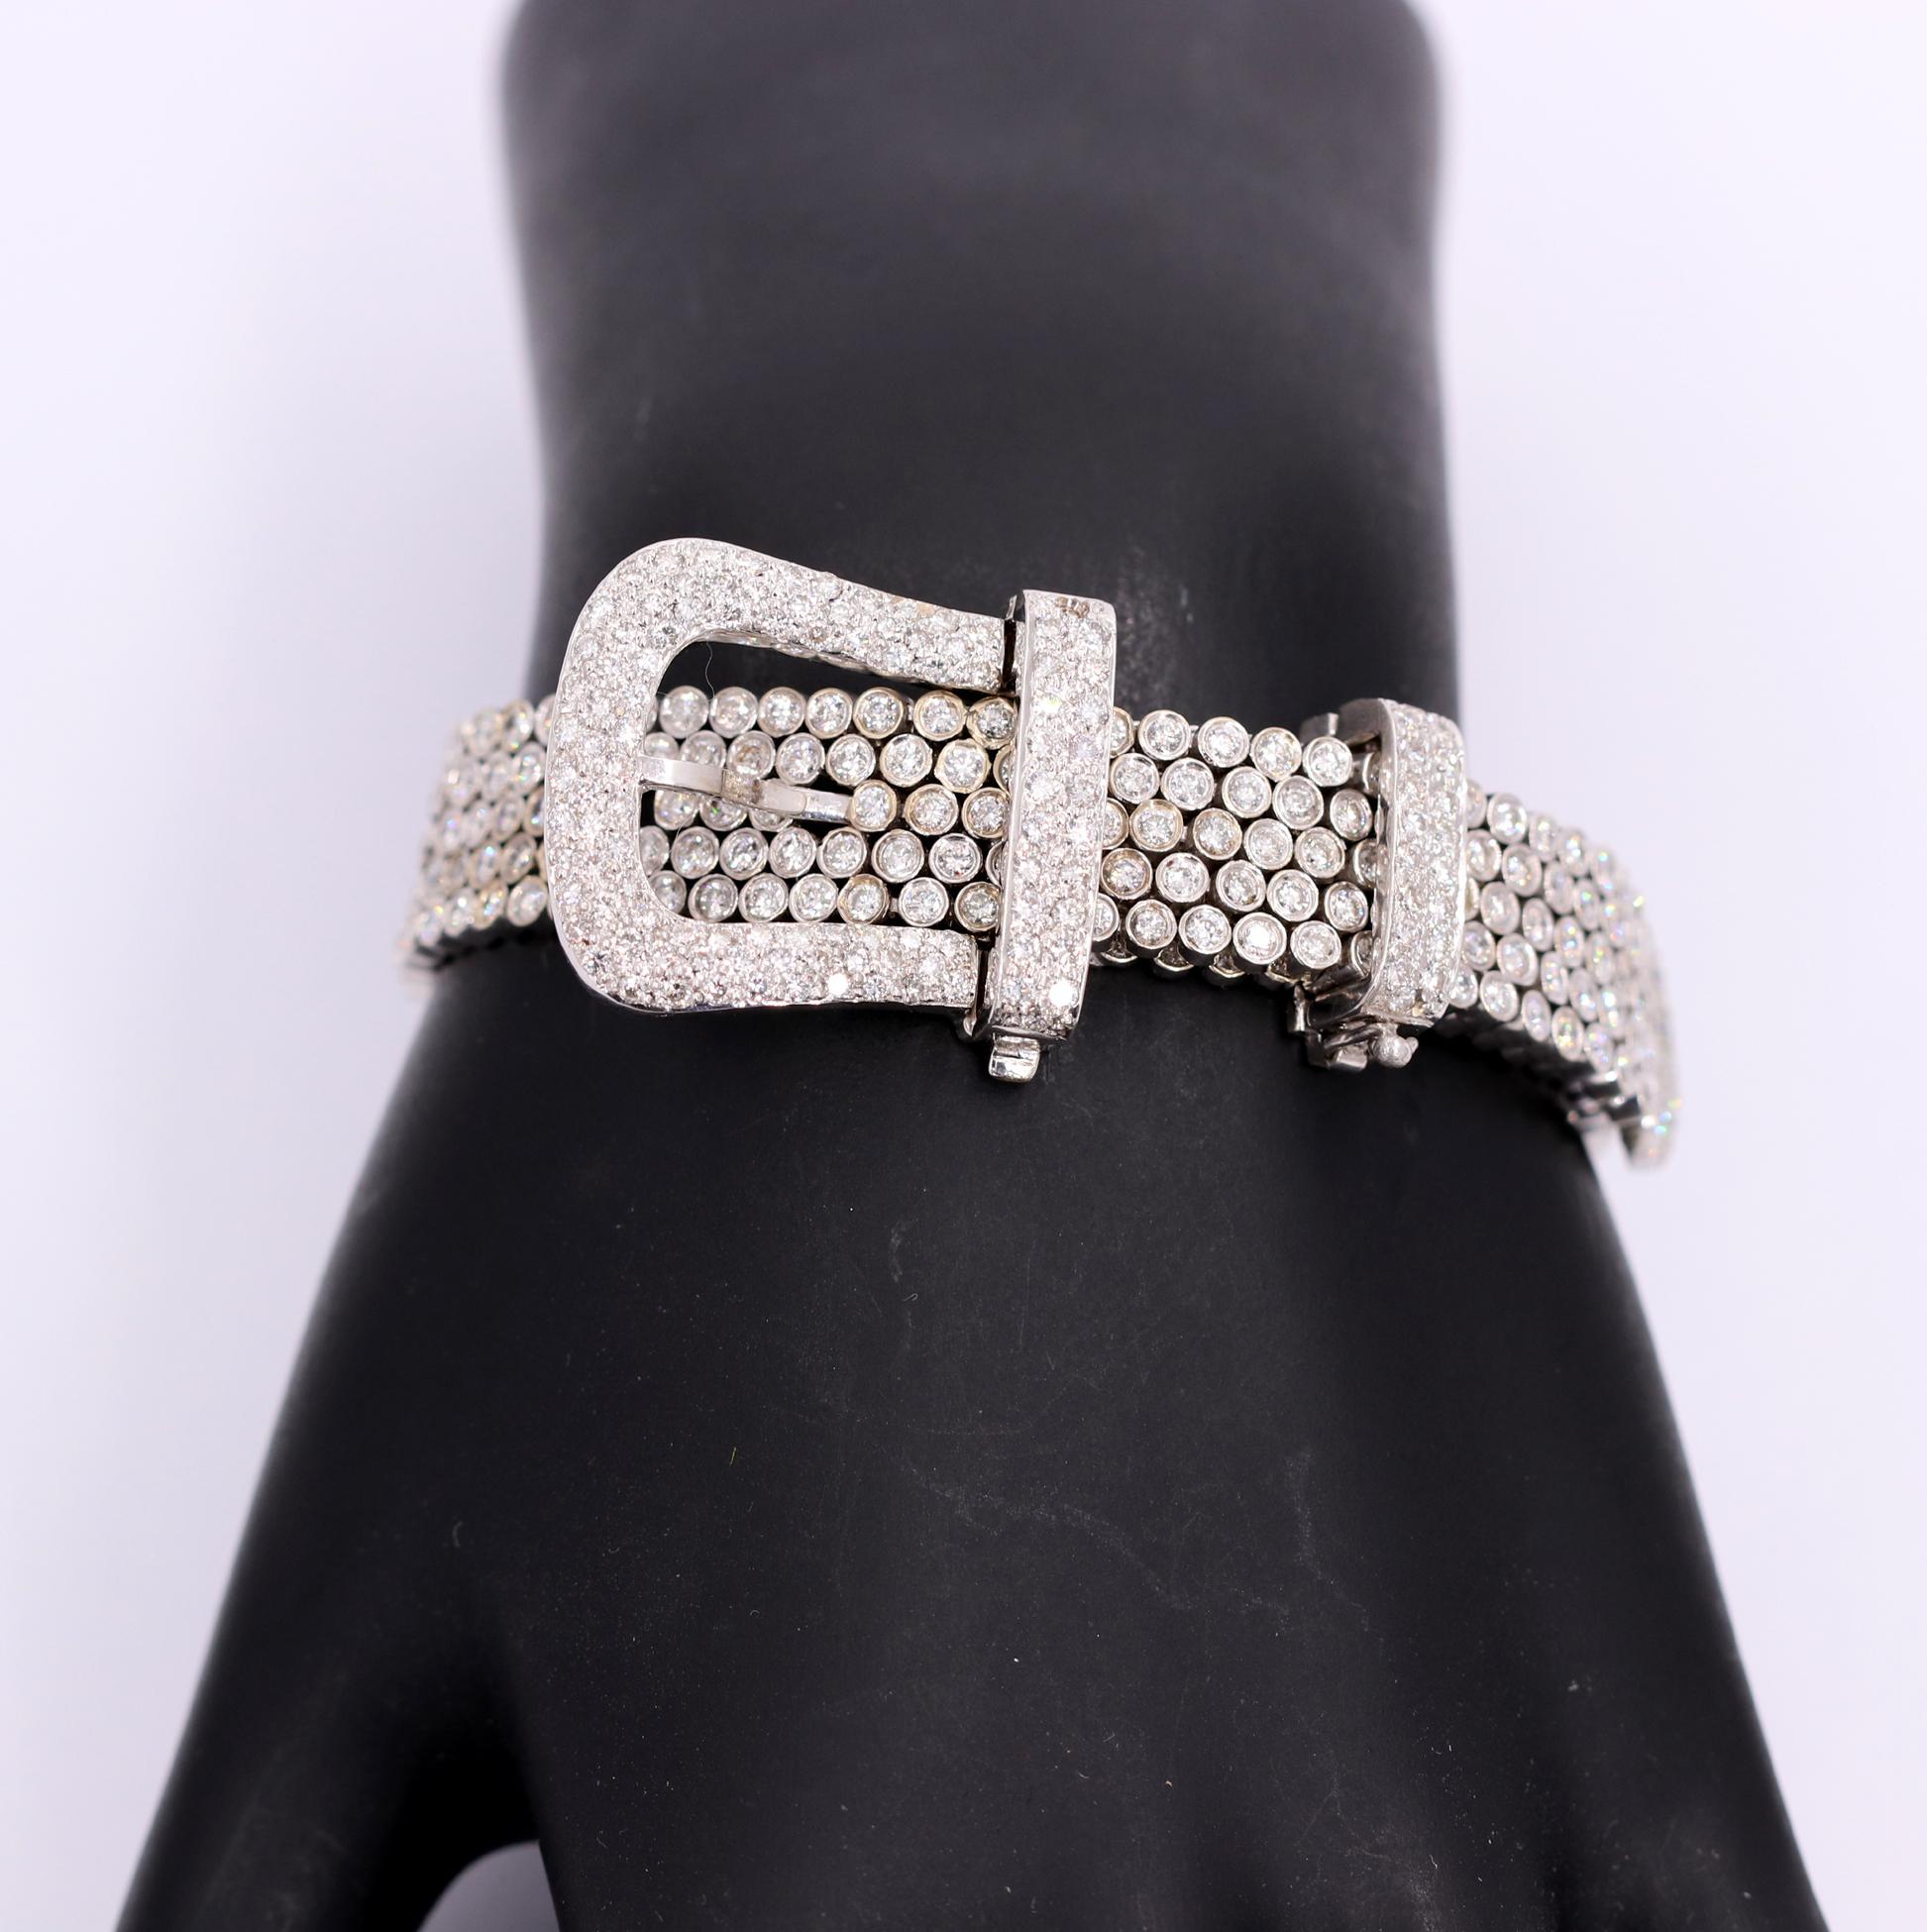 A ladies white gold bracelet with a buckle design, set with 540 round brilliant cut diamonds. The body of the bracelet measures 1/2 an inch wide, and the buckle measures 7/8 of an inch wide. This fabulous bracelet scintillates with a total of